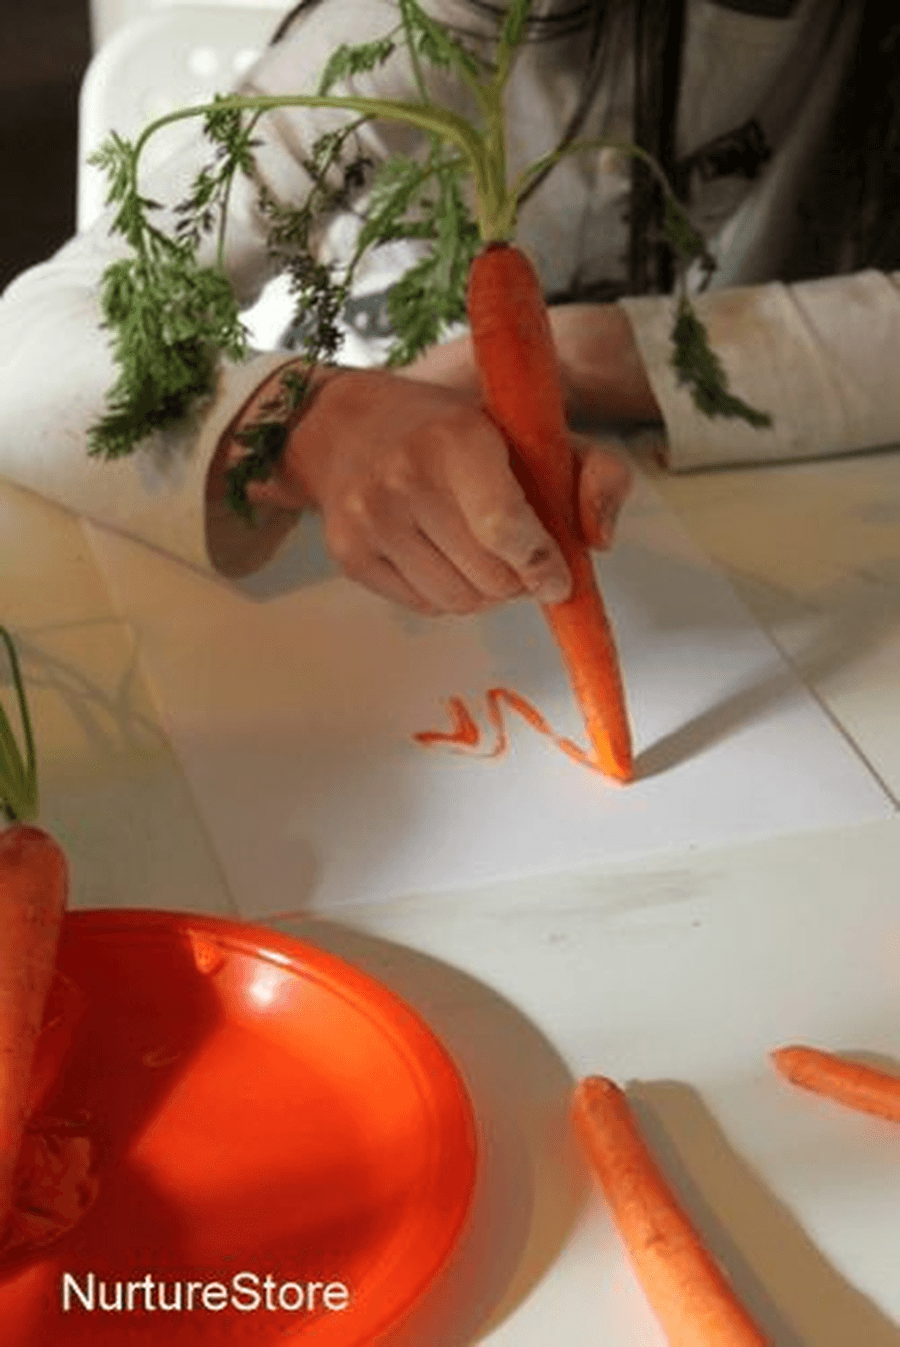 Practice writing your sounds using a carrot. Can you write the names of the different vegetables from the story?